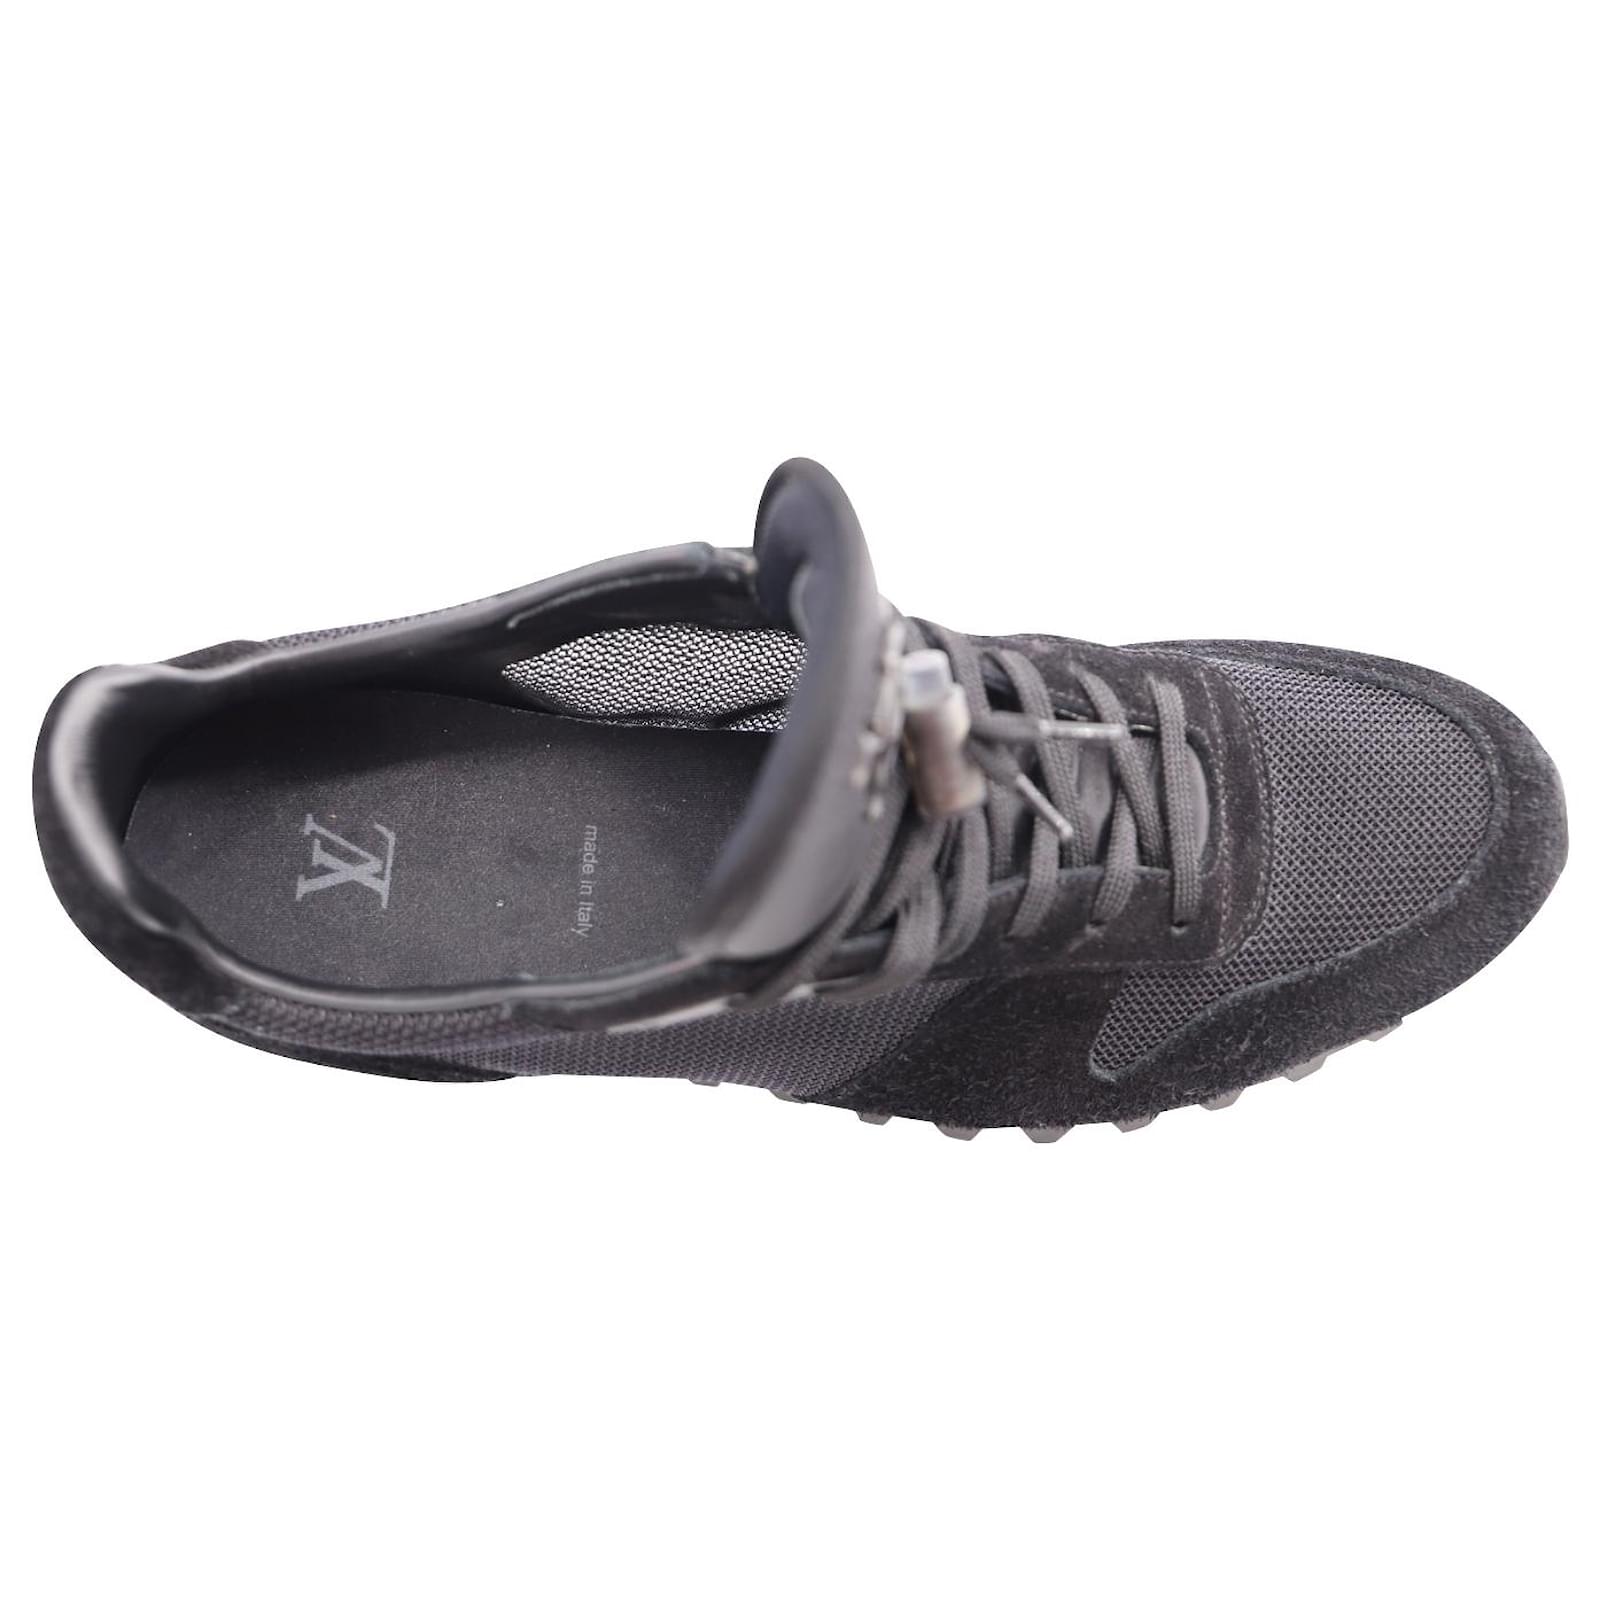 Louis Vuitton Black Suede And Mesh Runner Low Top Sneakers Size 42